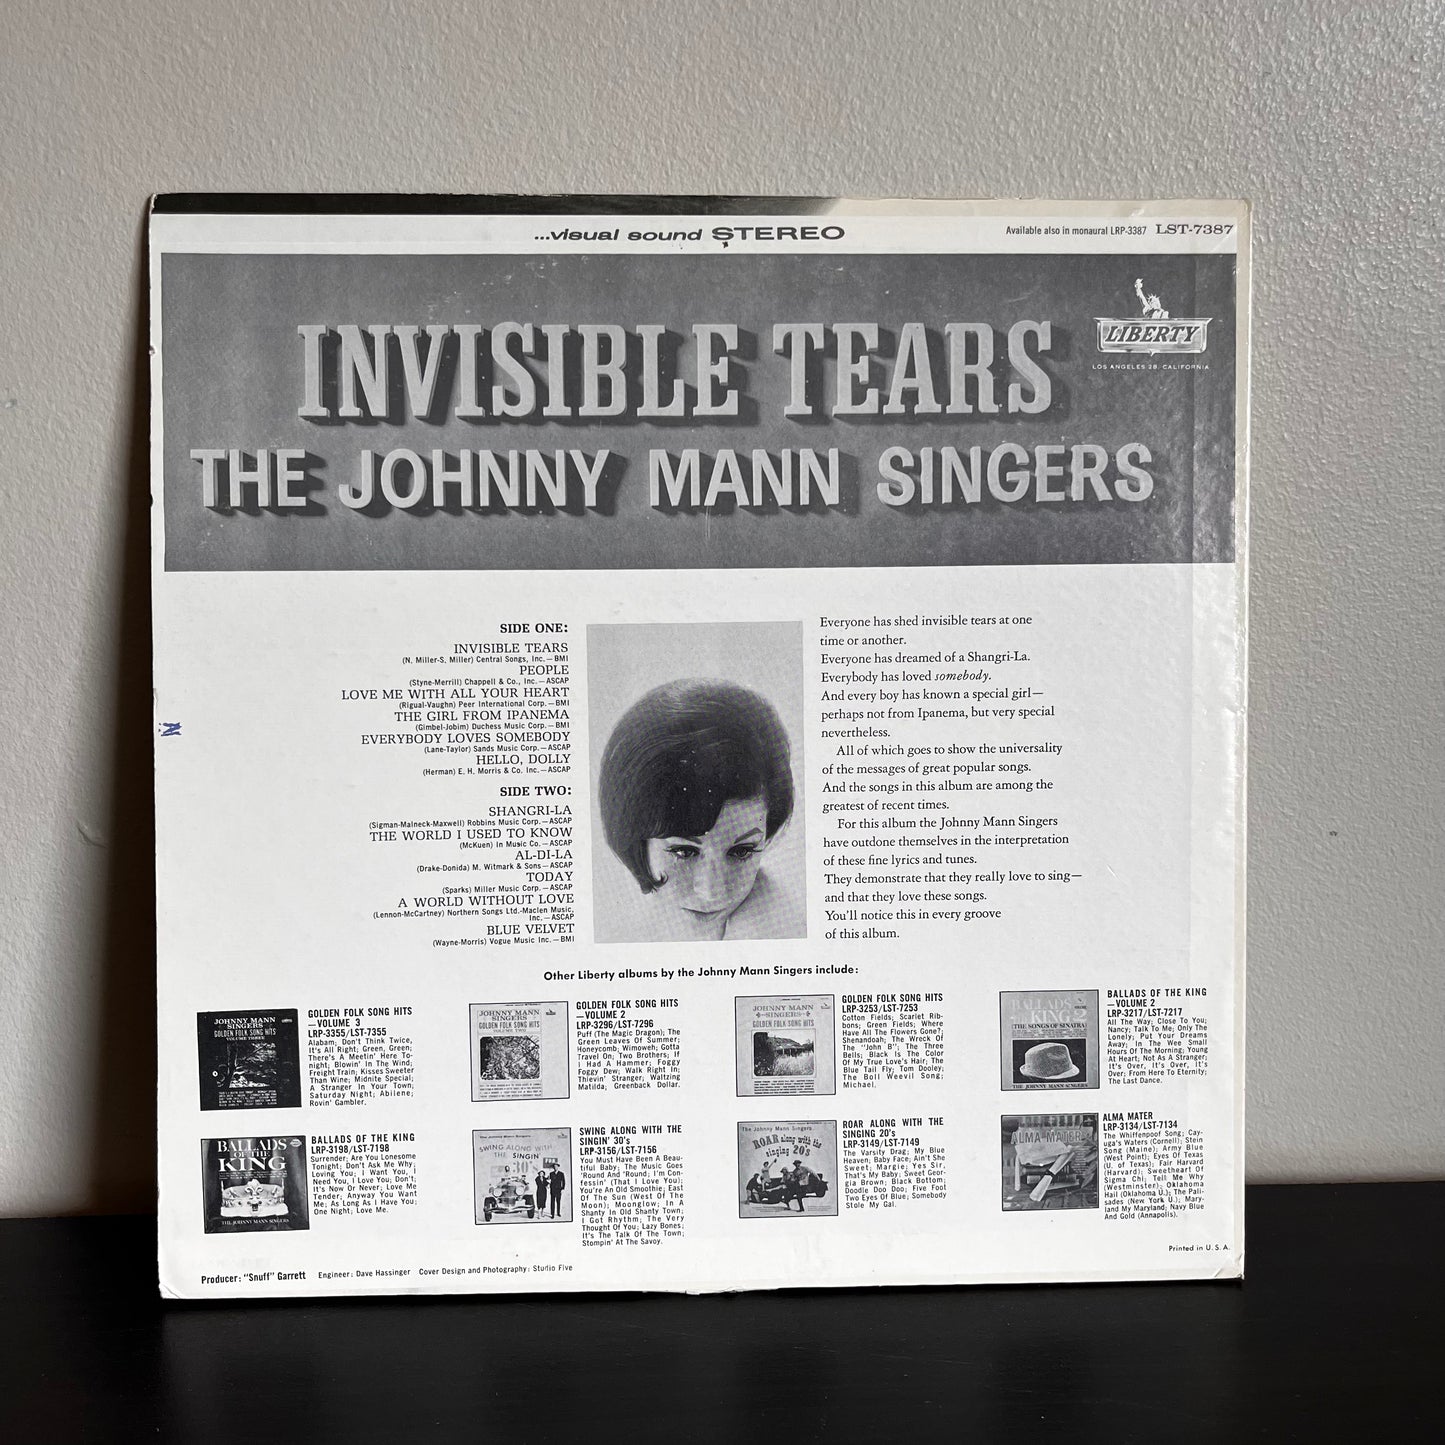 Invisible Tears - The Johnny Mann Singers STEREO SLT-7387 Liberty VG+ Condition